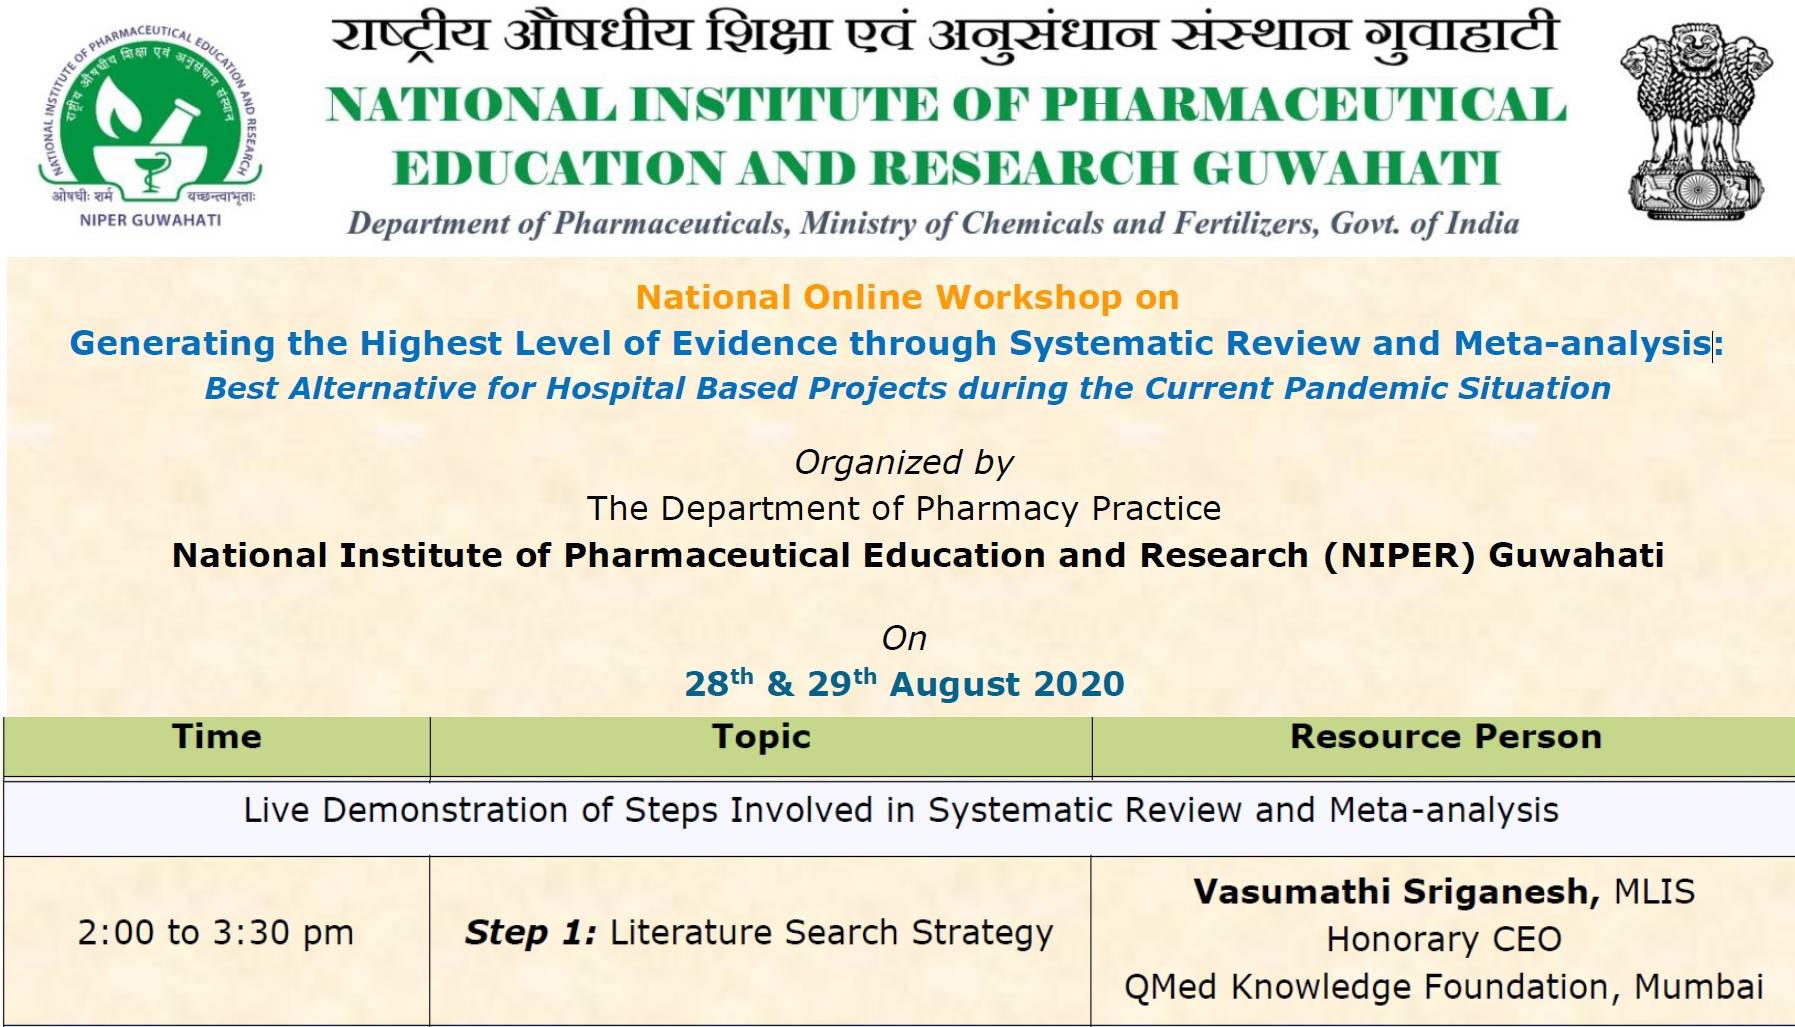 National Institute of Pharmaceutical Education and Research (NIPER) Guwahati